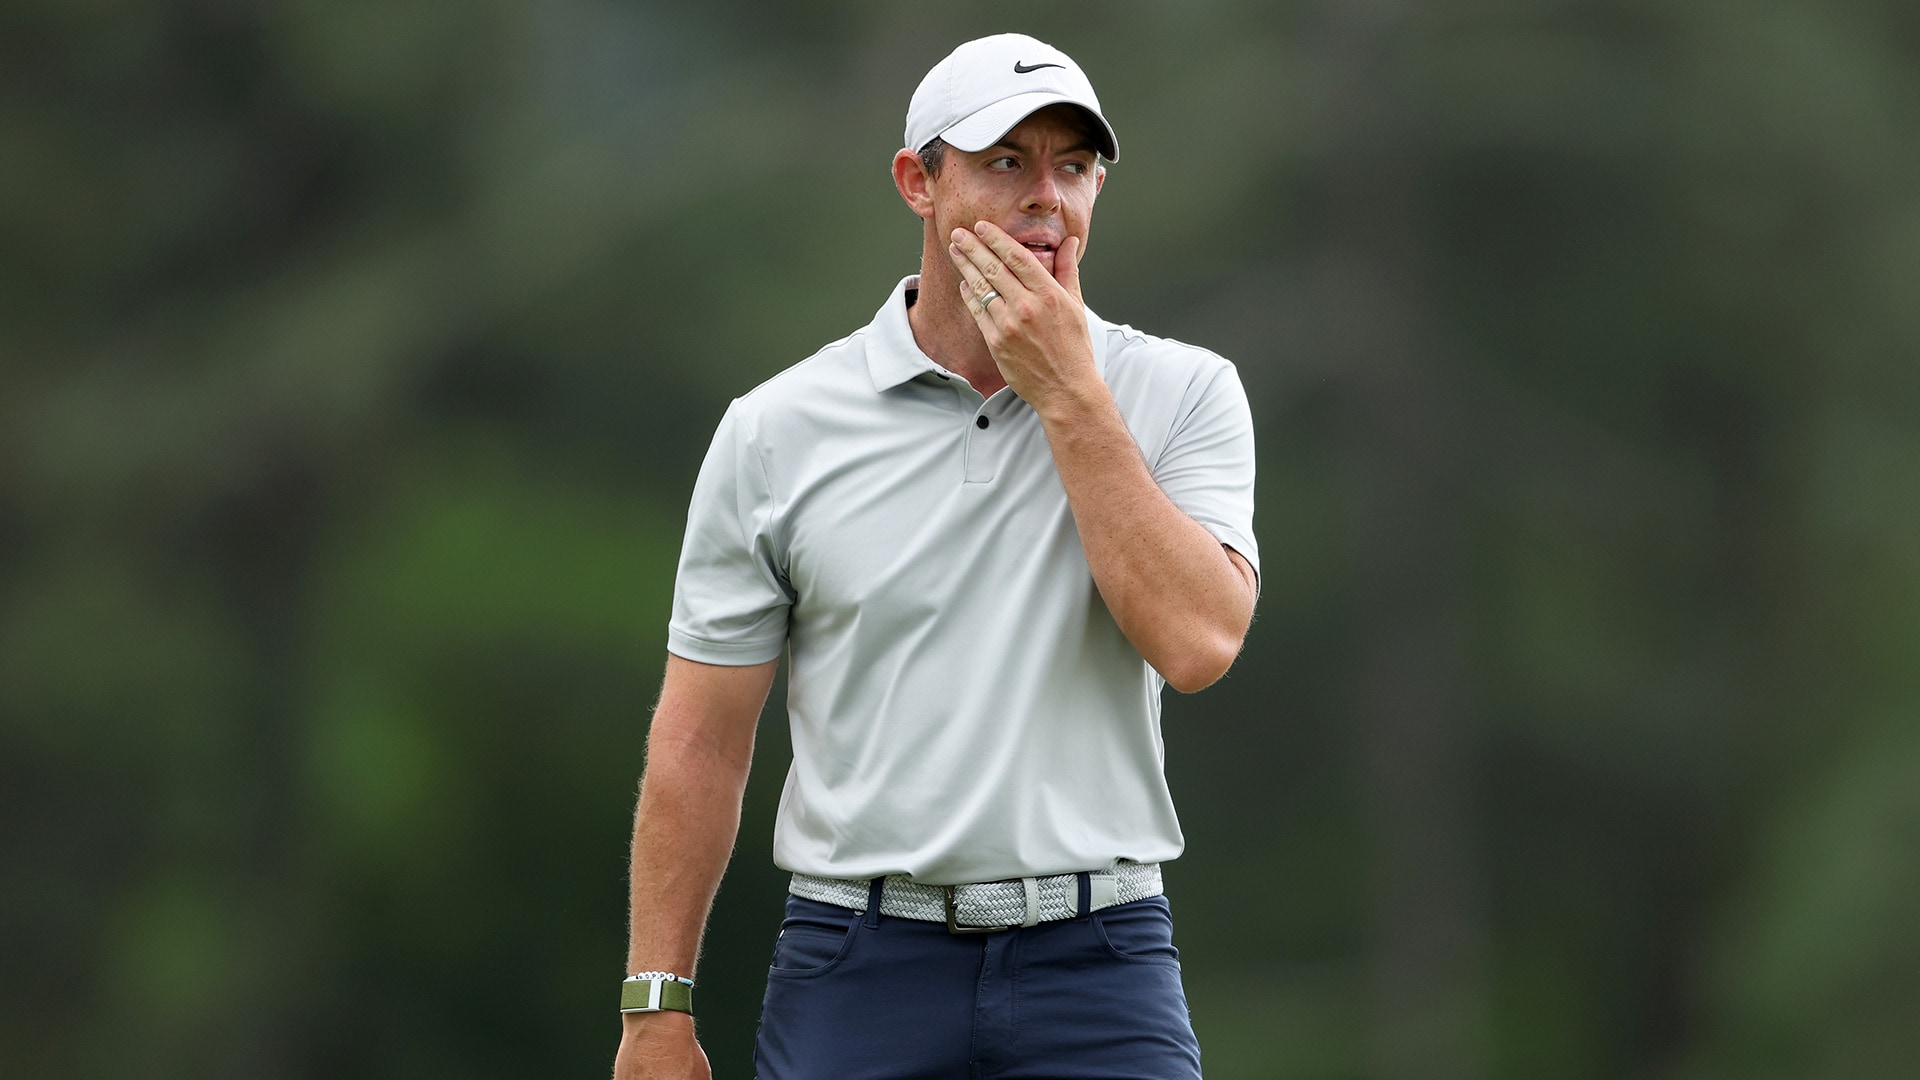 Rory McIlroy likely to miss another cut at the Masters after second-round 77